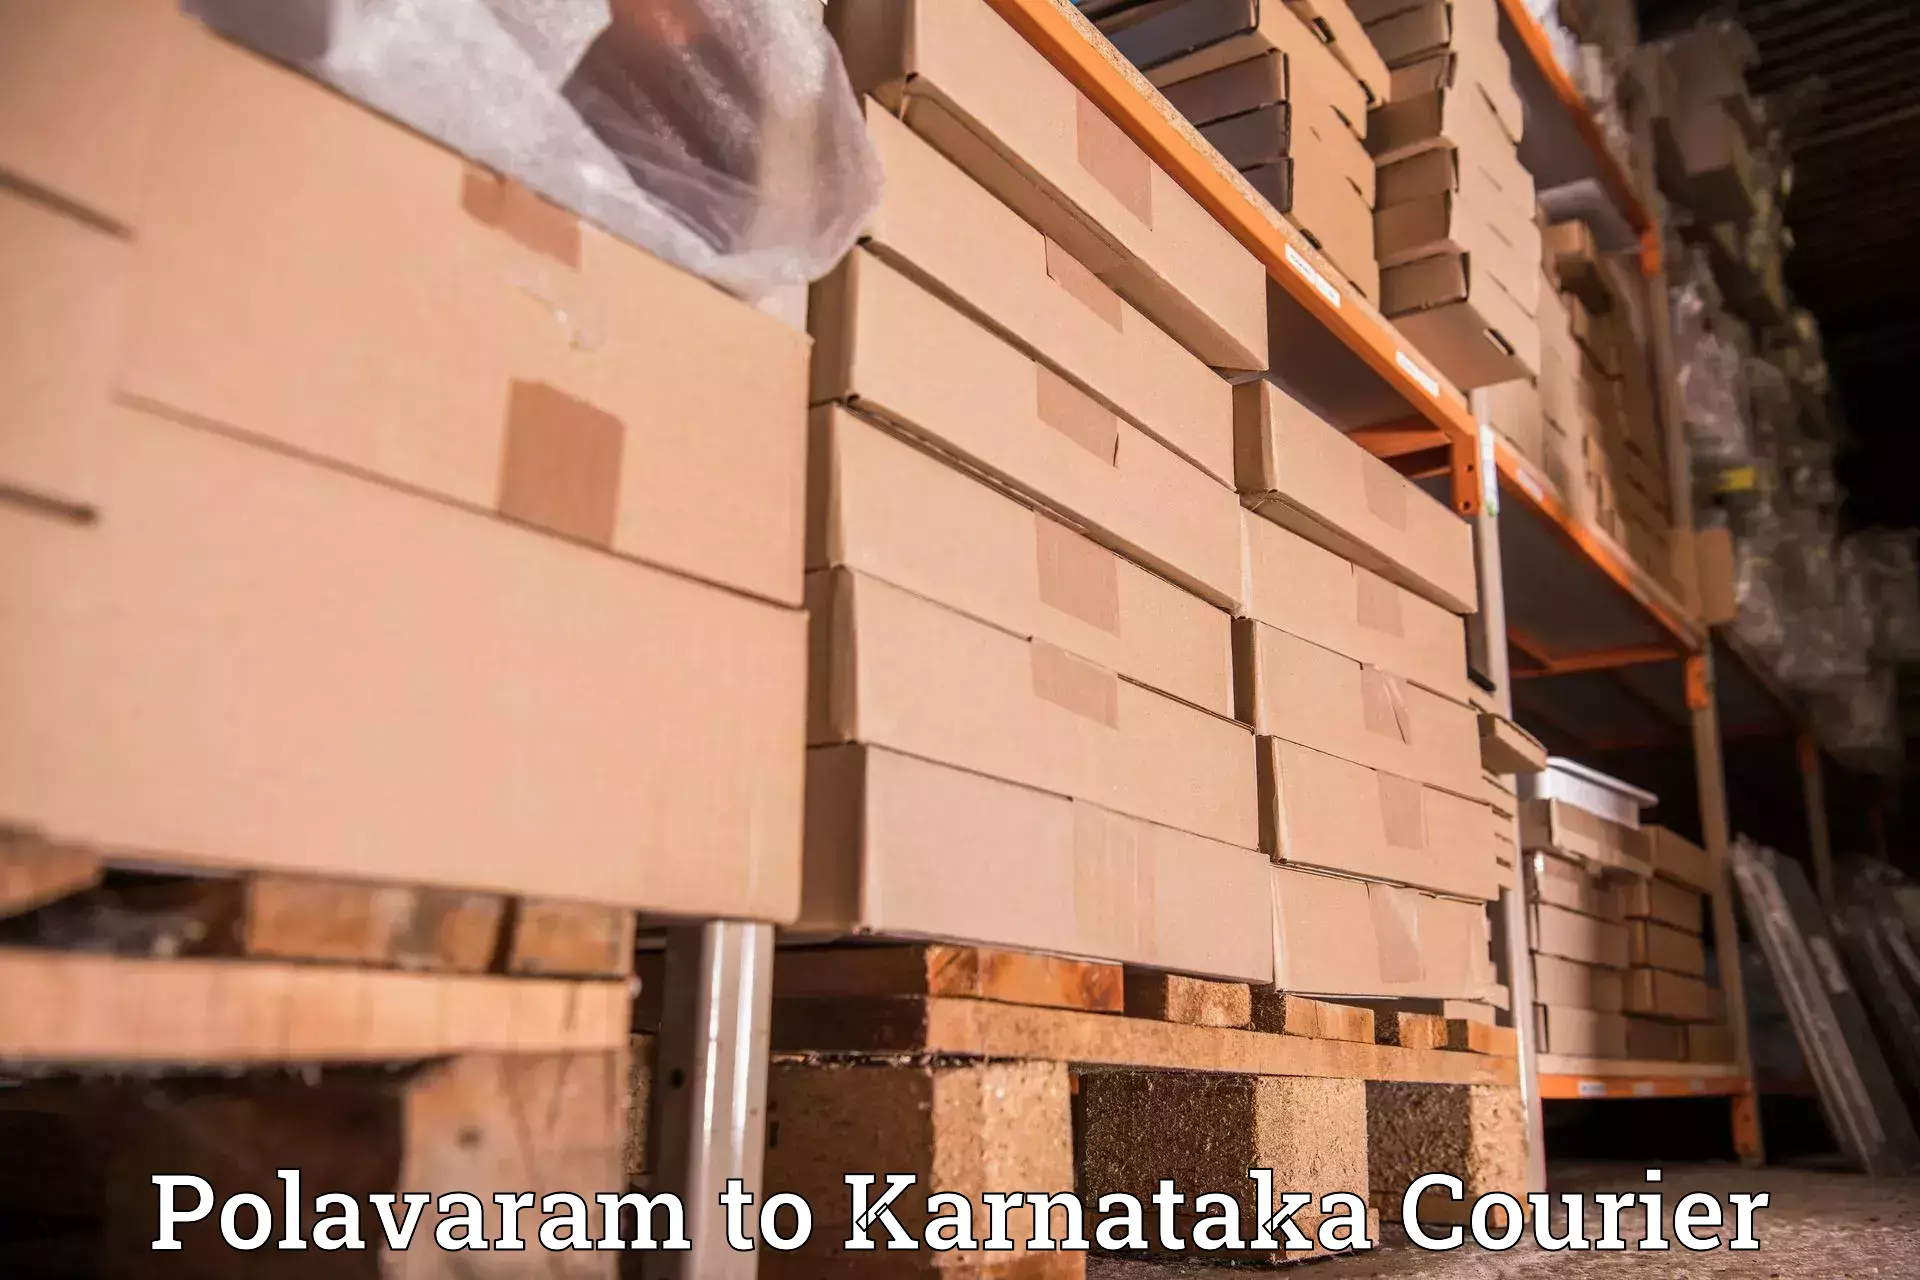 Reliable courier service Polavaram to Manipal Academy of Higher Education